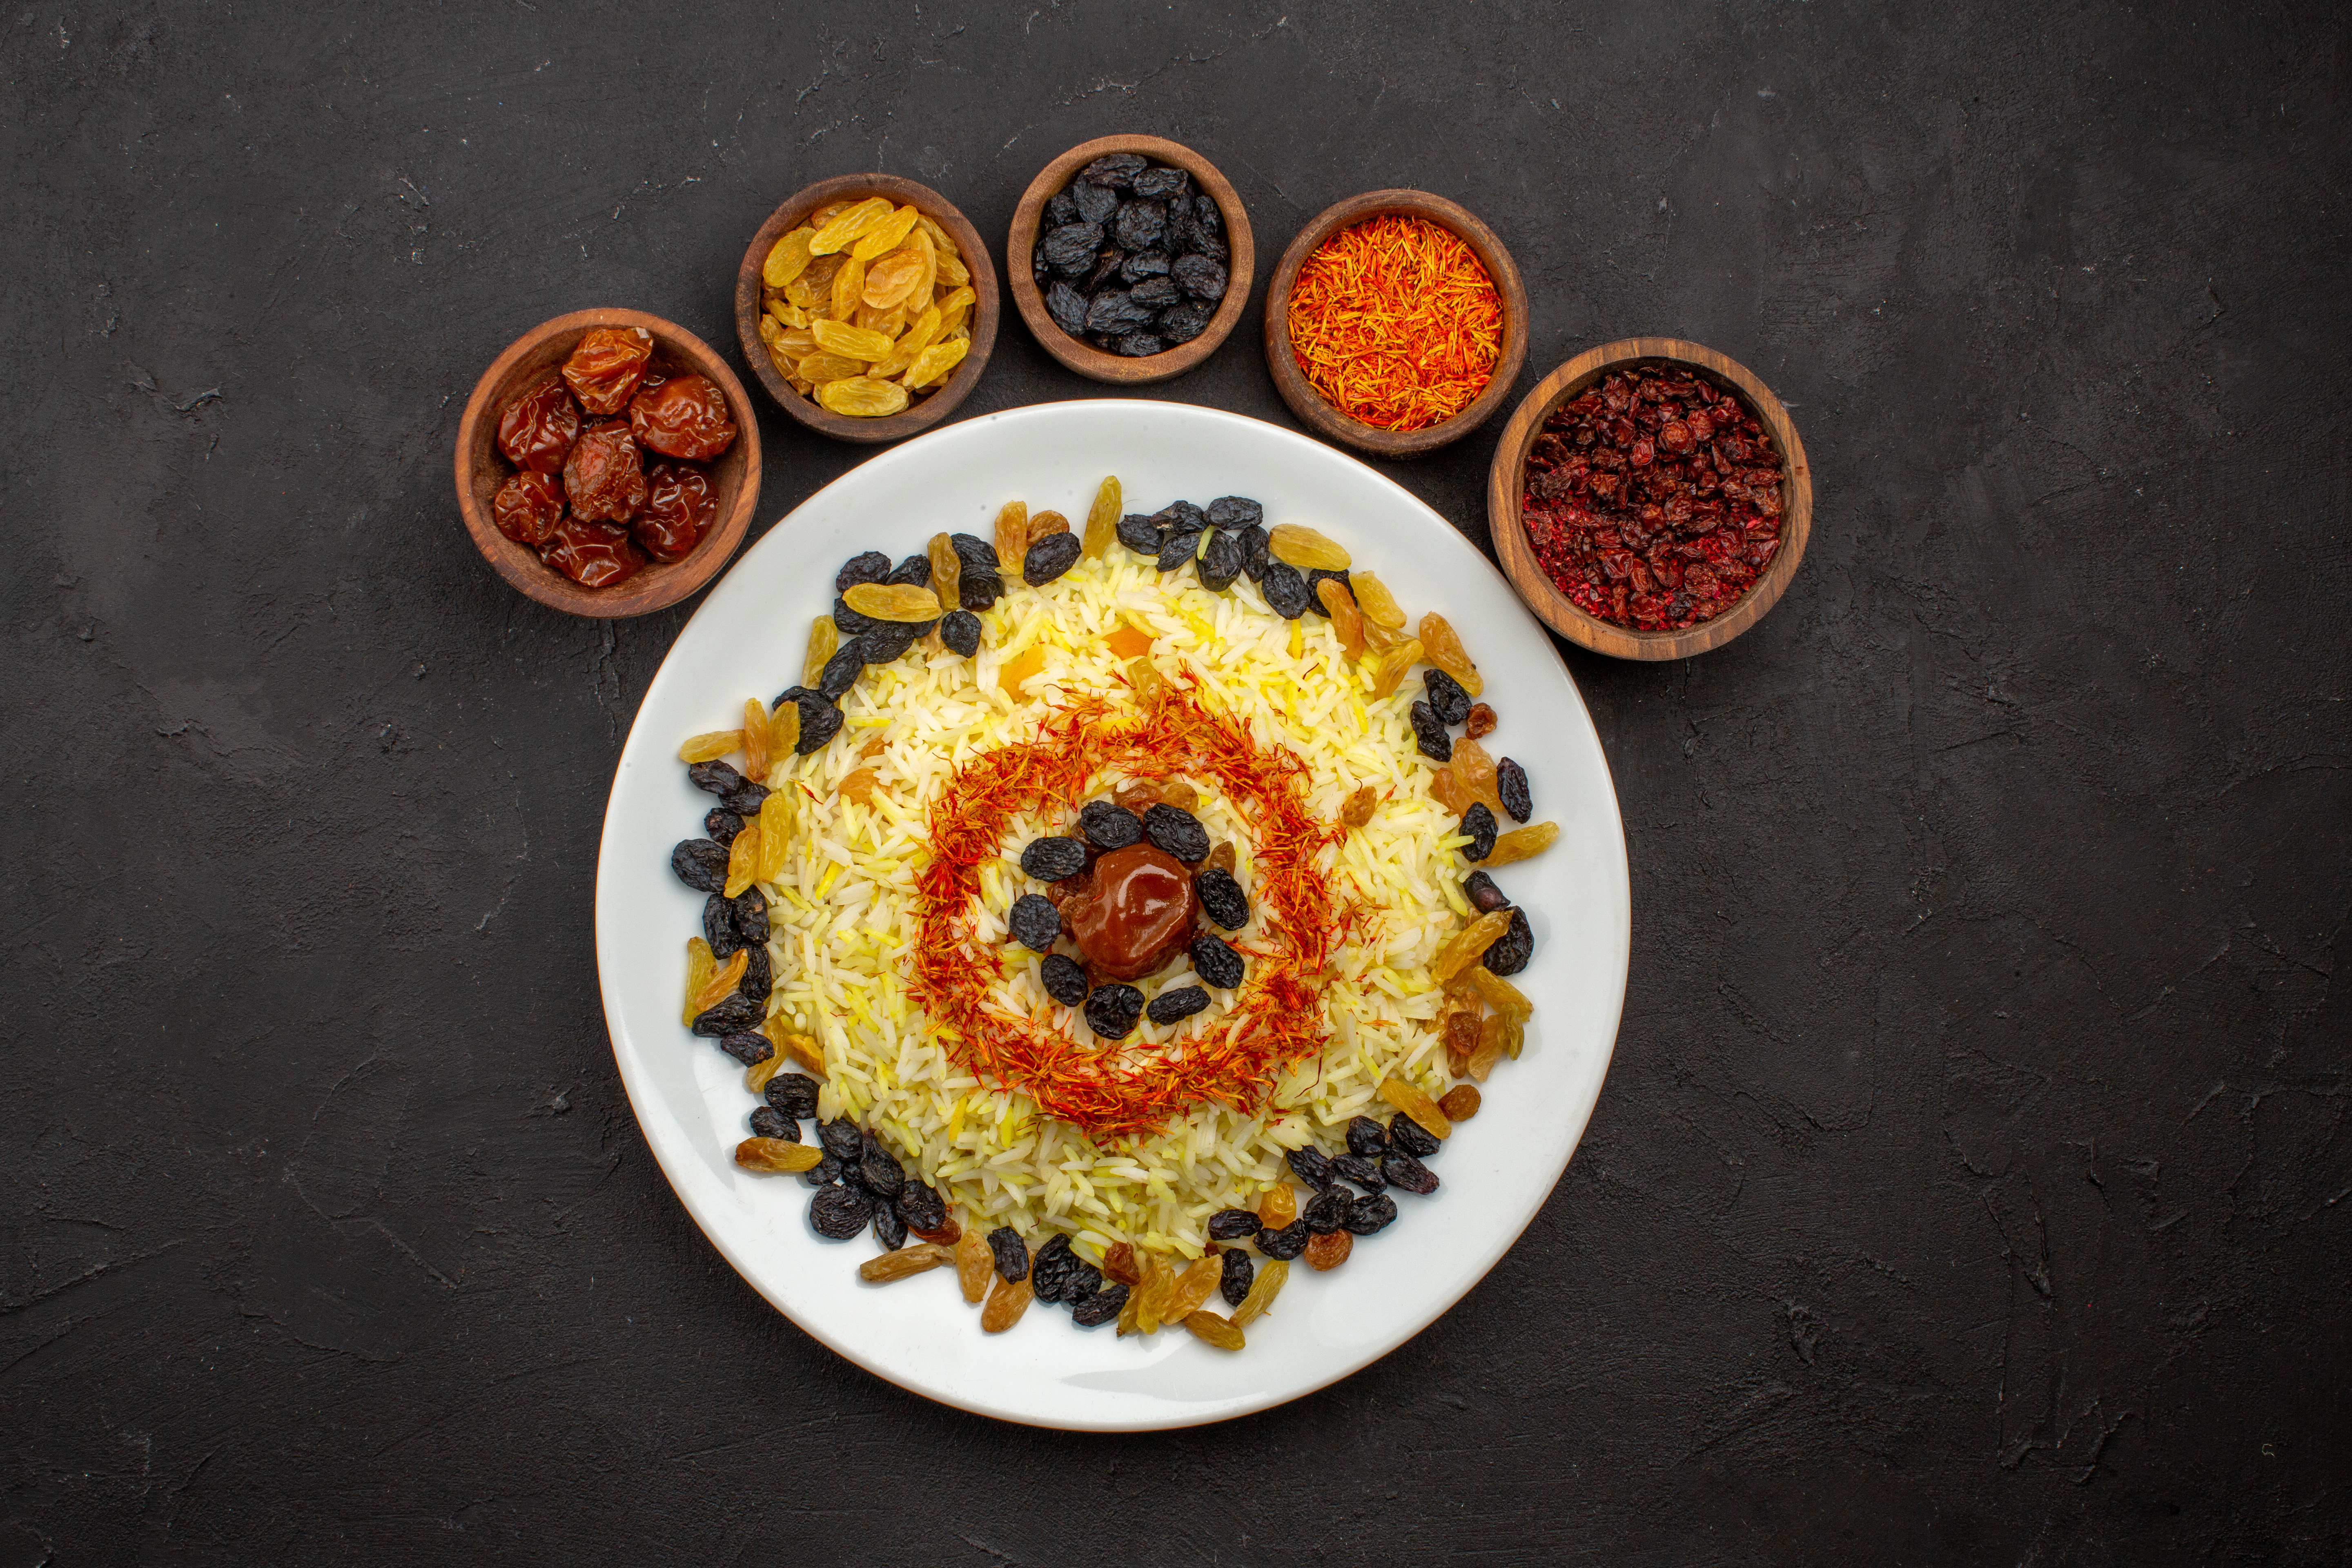 Some of the delicious toppings that bring out the flavor in the plov © Nick with his Pic / Shutterstock